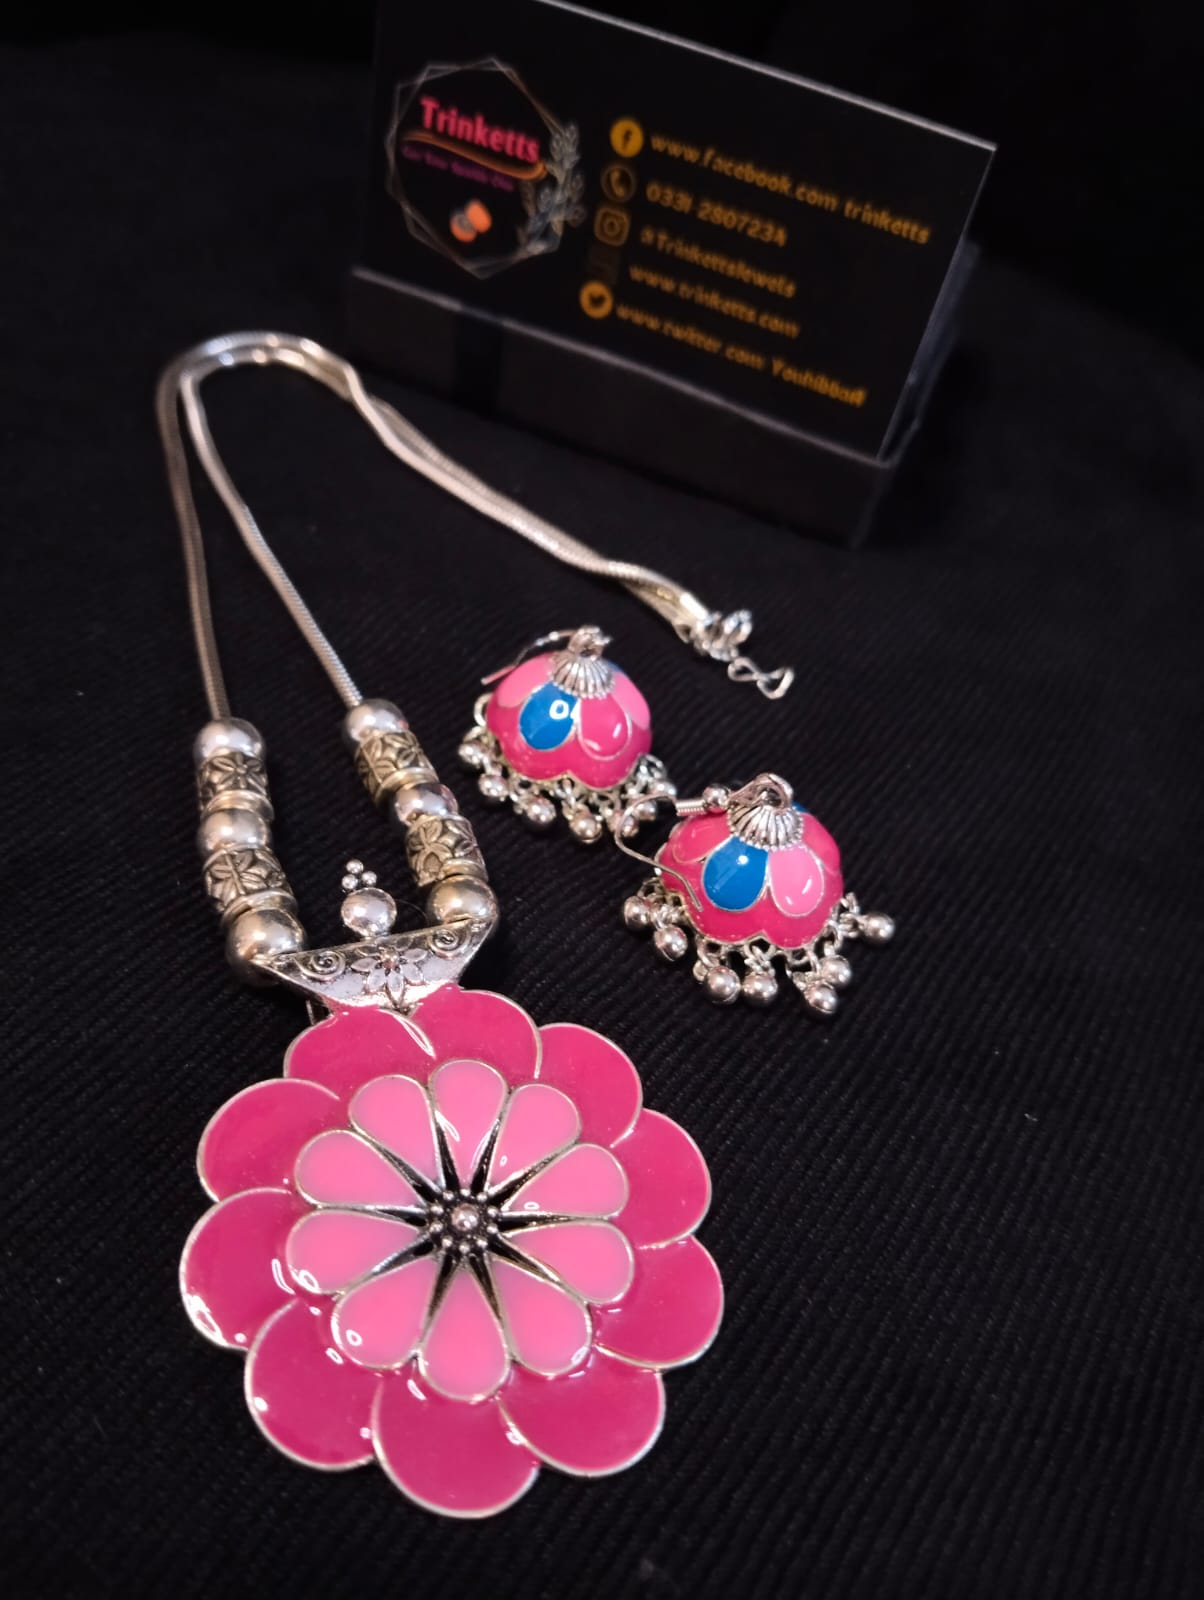 A floral-shaped pendant in pink and light pink Meena Kaari design, accompanied by matching Meena Karai jhumkis (dangling earrings) in in pink,light pink and blue, featuring attached ghungroos (small bells). The pendant hangs on an oxidized silver chain with an S hook closure.